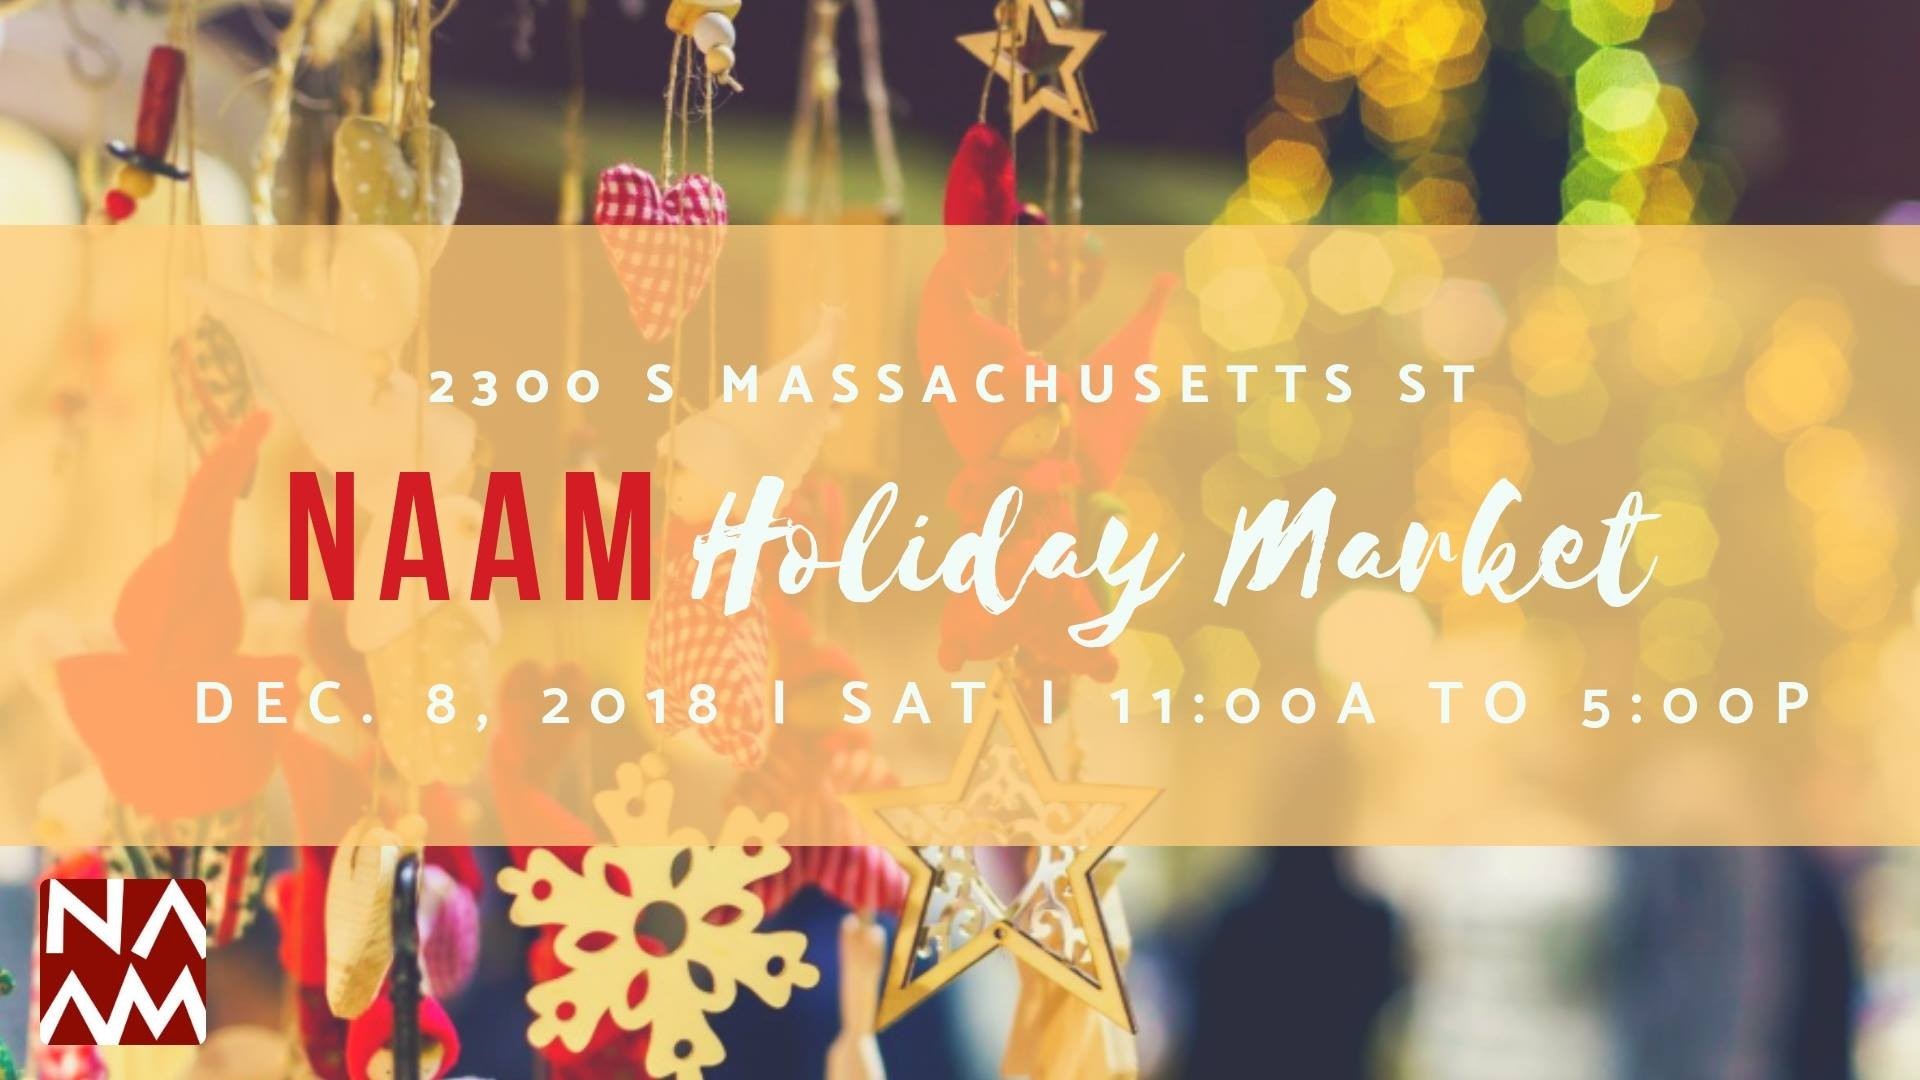 1920x1080 NAAM Holiday Market at Northwest African American Museum in Seattle, WA on  Sat Dec 8, 11 am–5 pm - Seattle Shopping Events Calendar - The Stranger